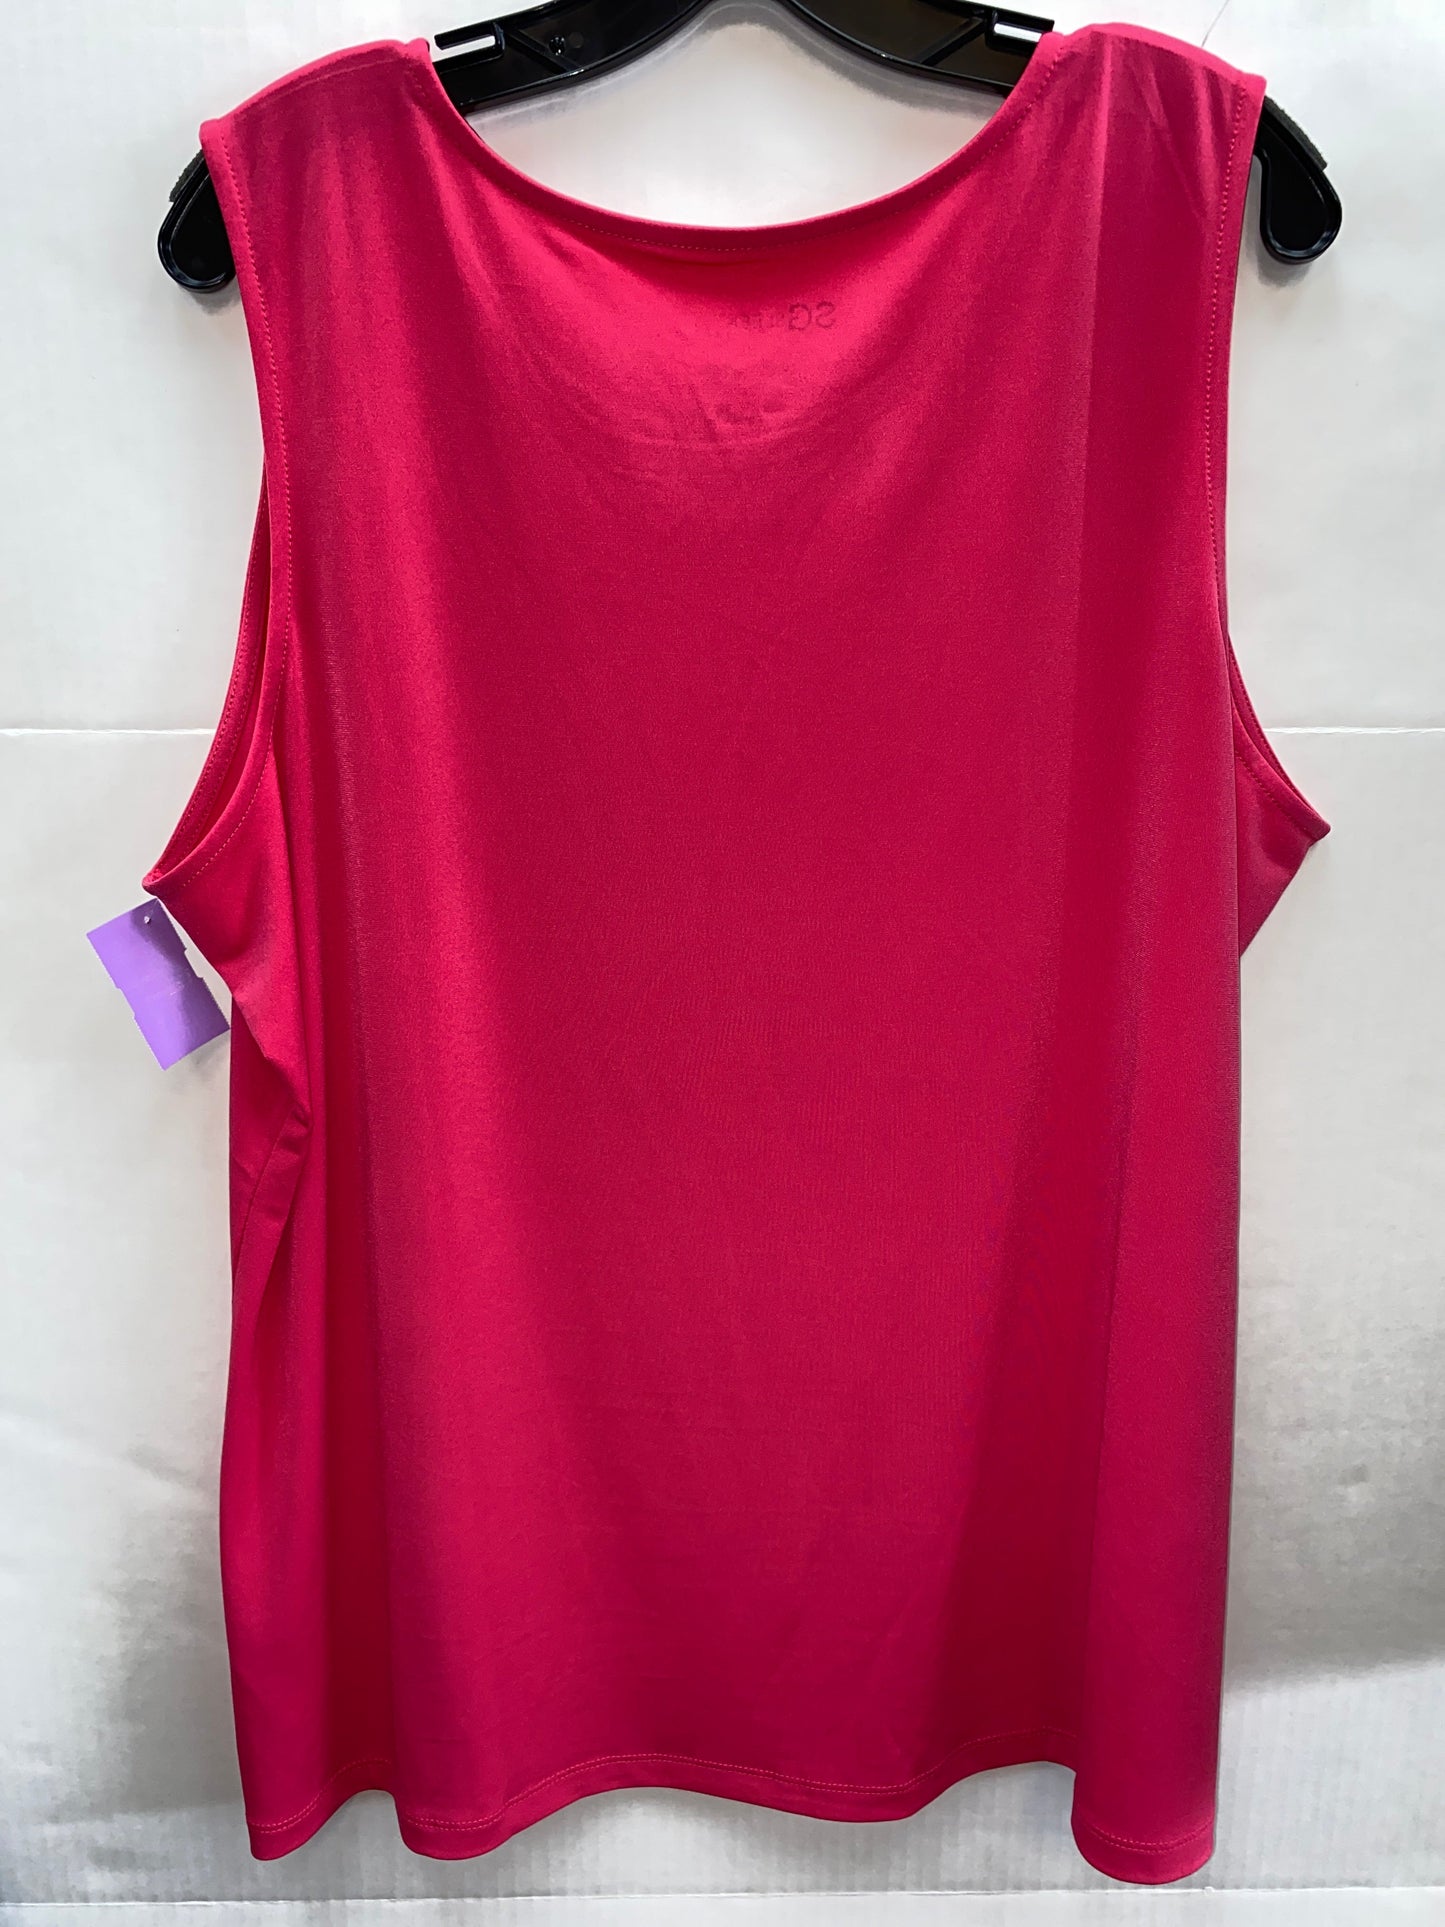 Pink Top Sleeveless Clothes Mentor, Size 3x